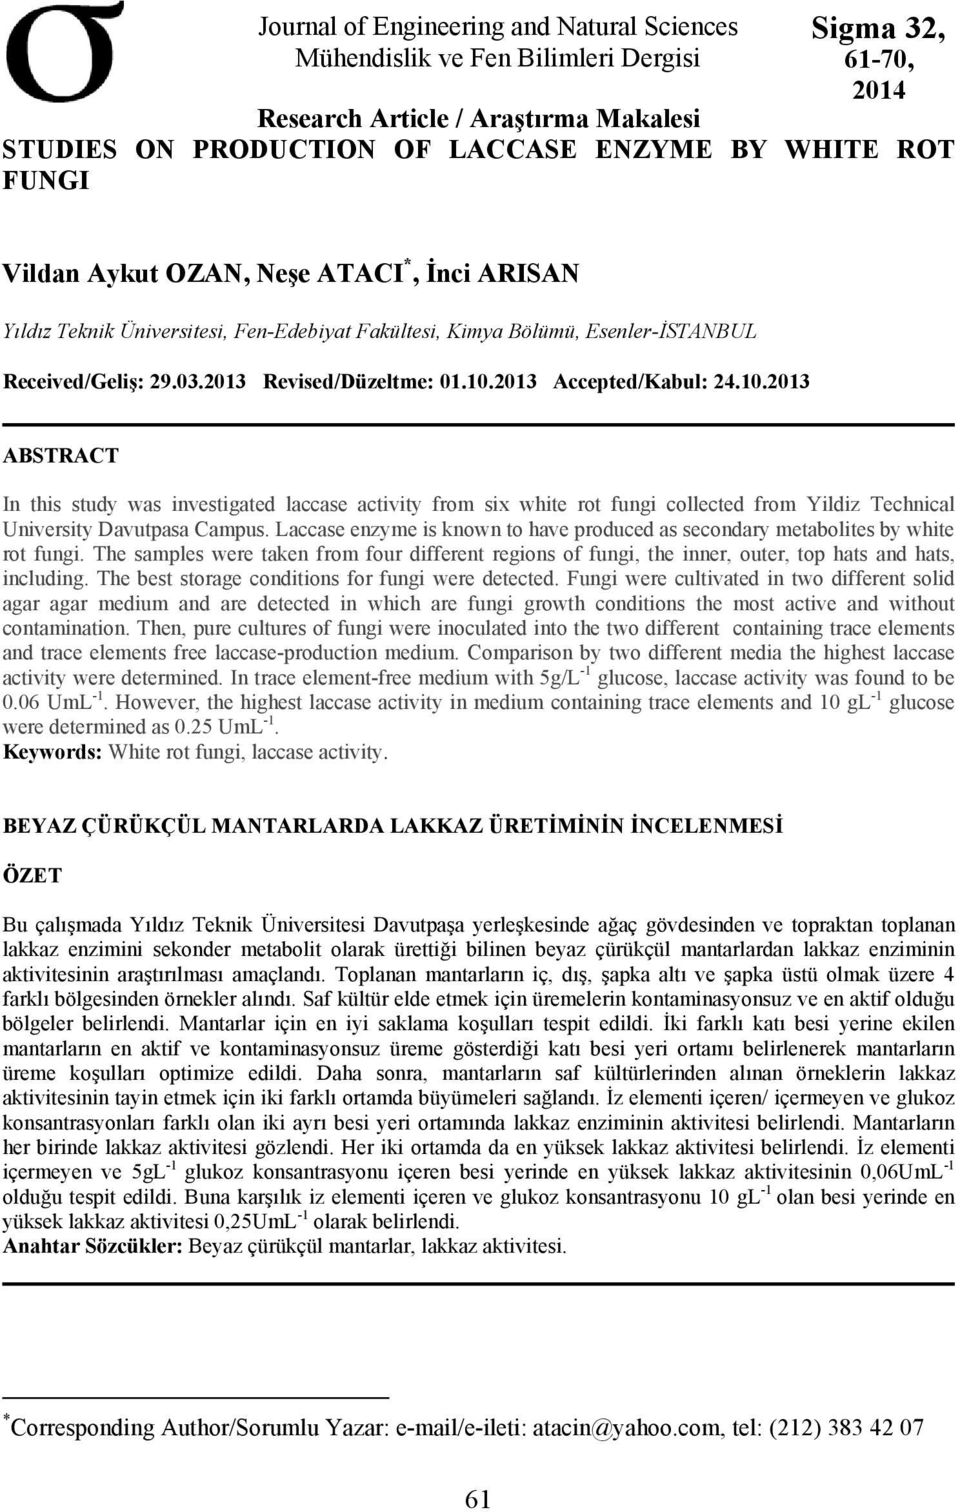 2013 Accepted/Kabul: 24.10.2013 ABSTRACT In this study was investigated laccase activity from six white rot fungi collected from Yildiz Technical University Davutpasa Campus.